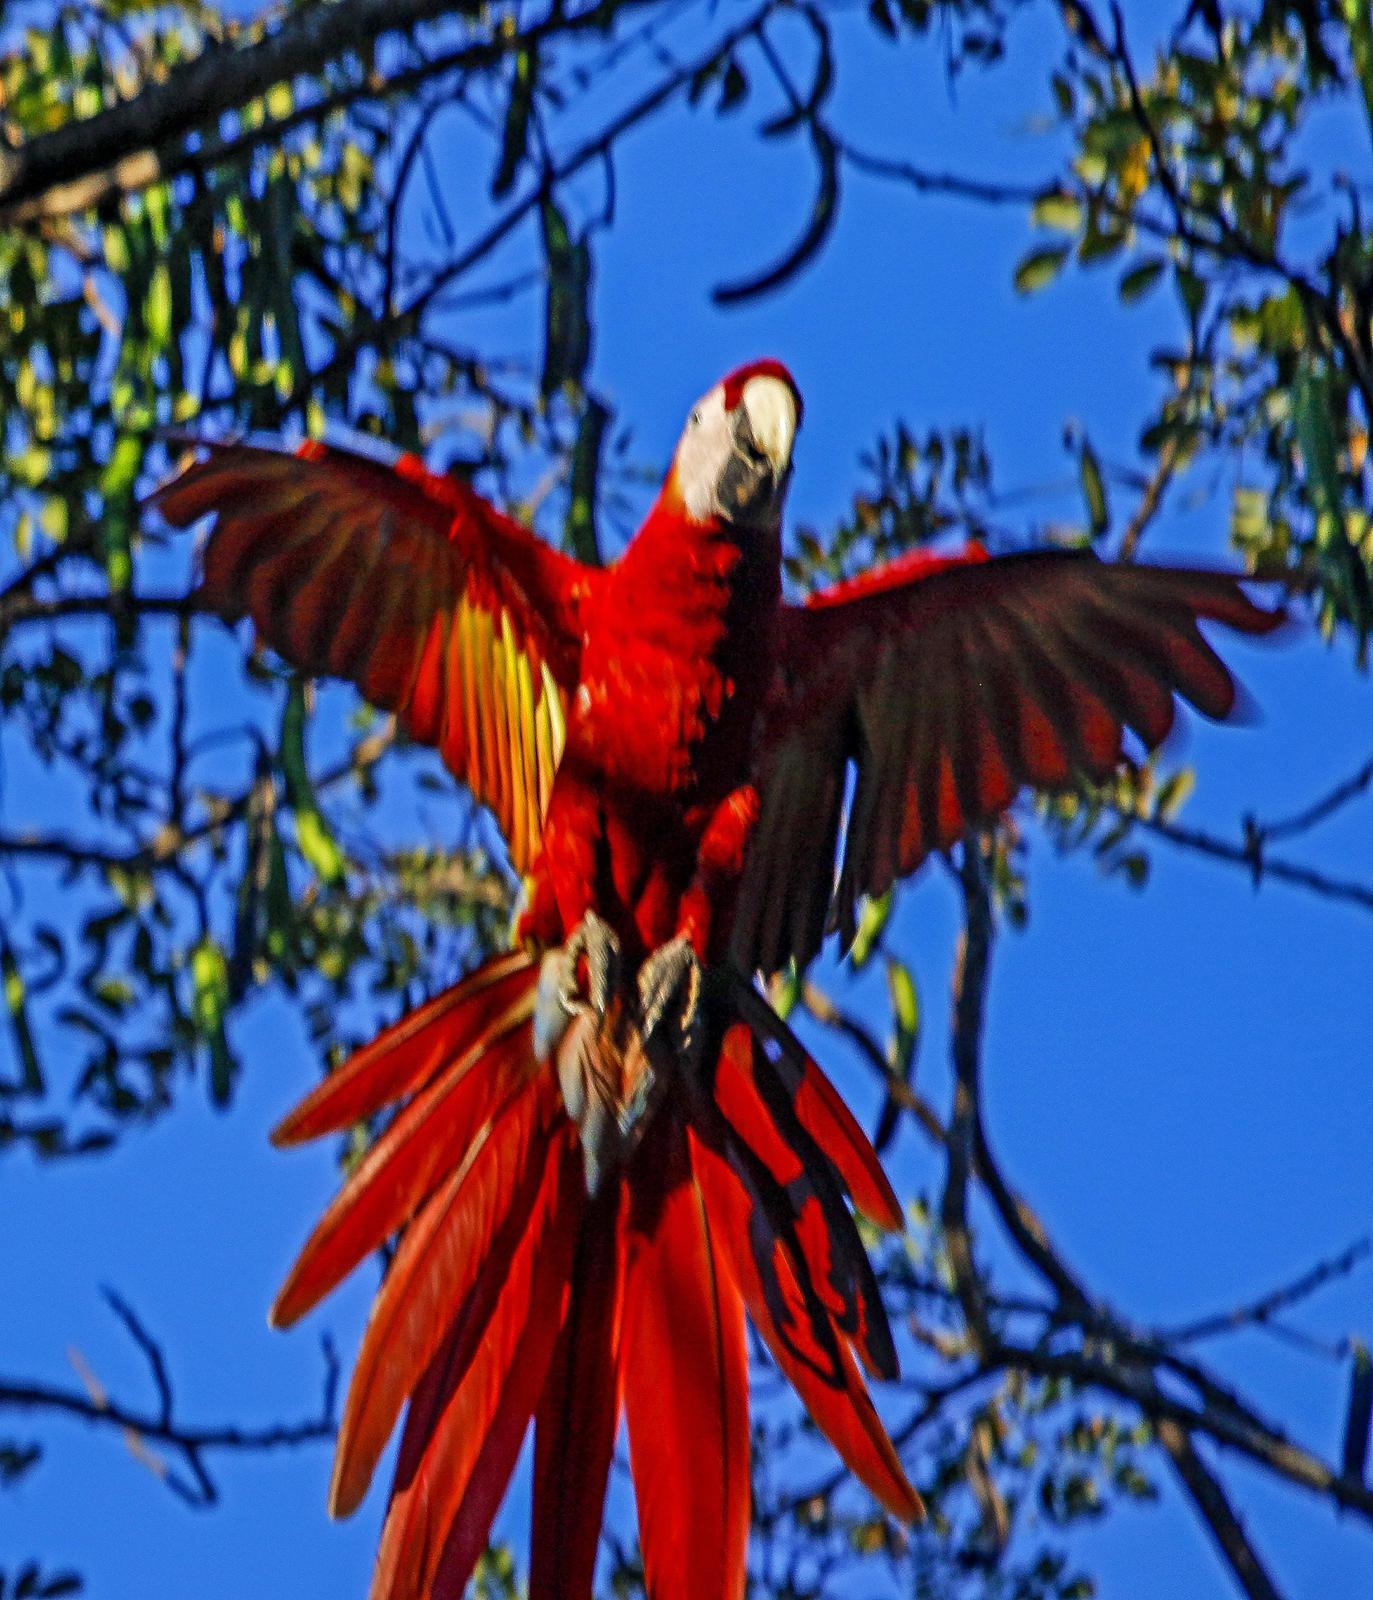 Blue-and-yellow x Scarlet Macaw (hybrid) Photo by wido hoville